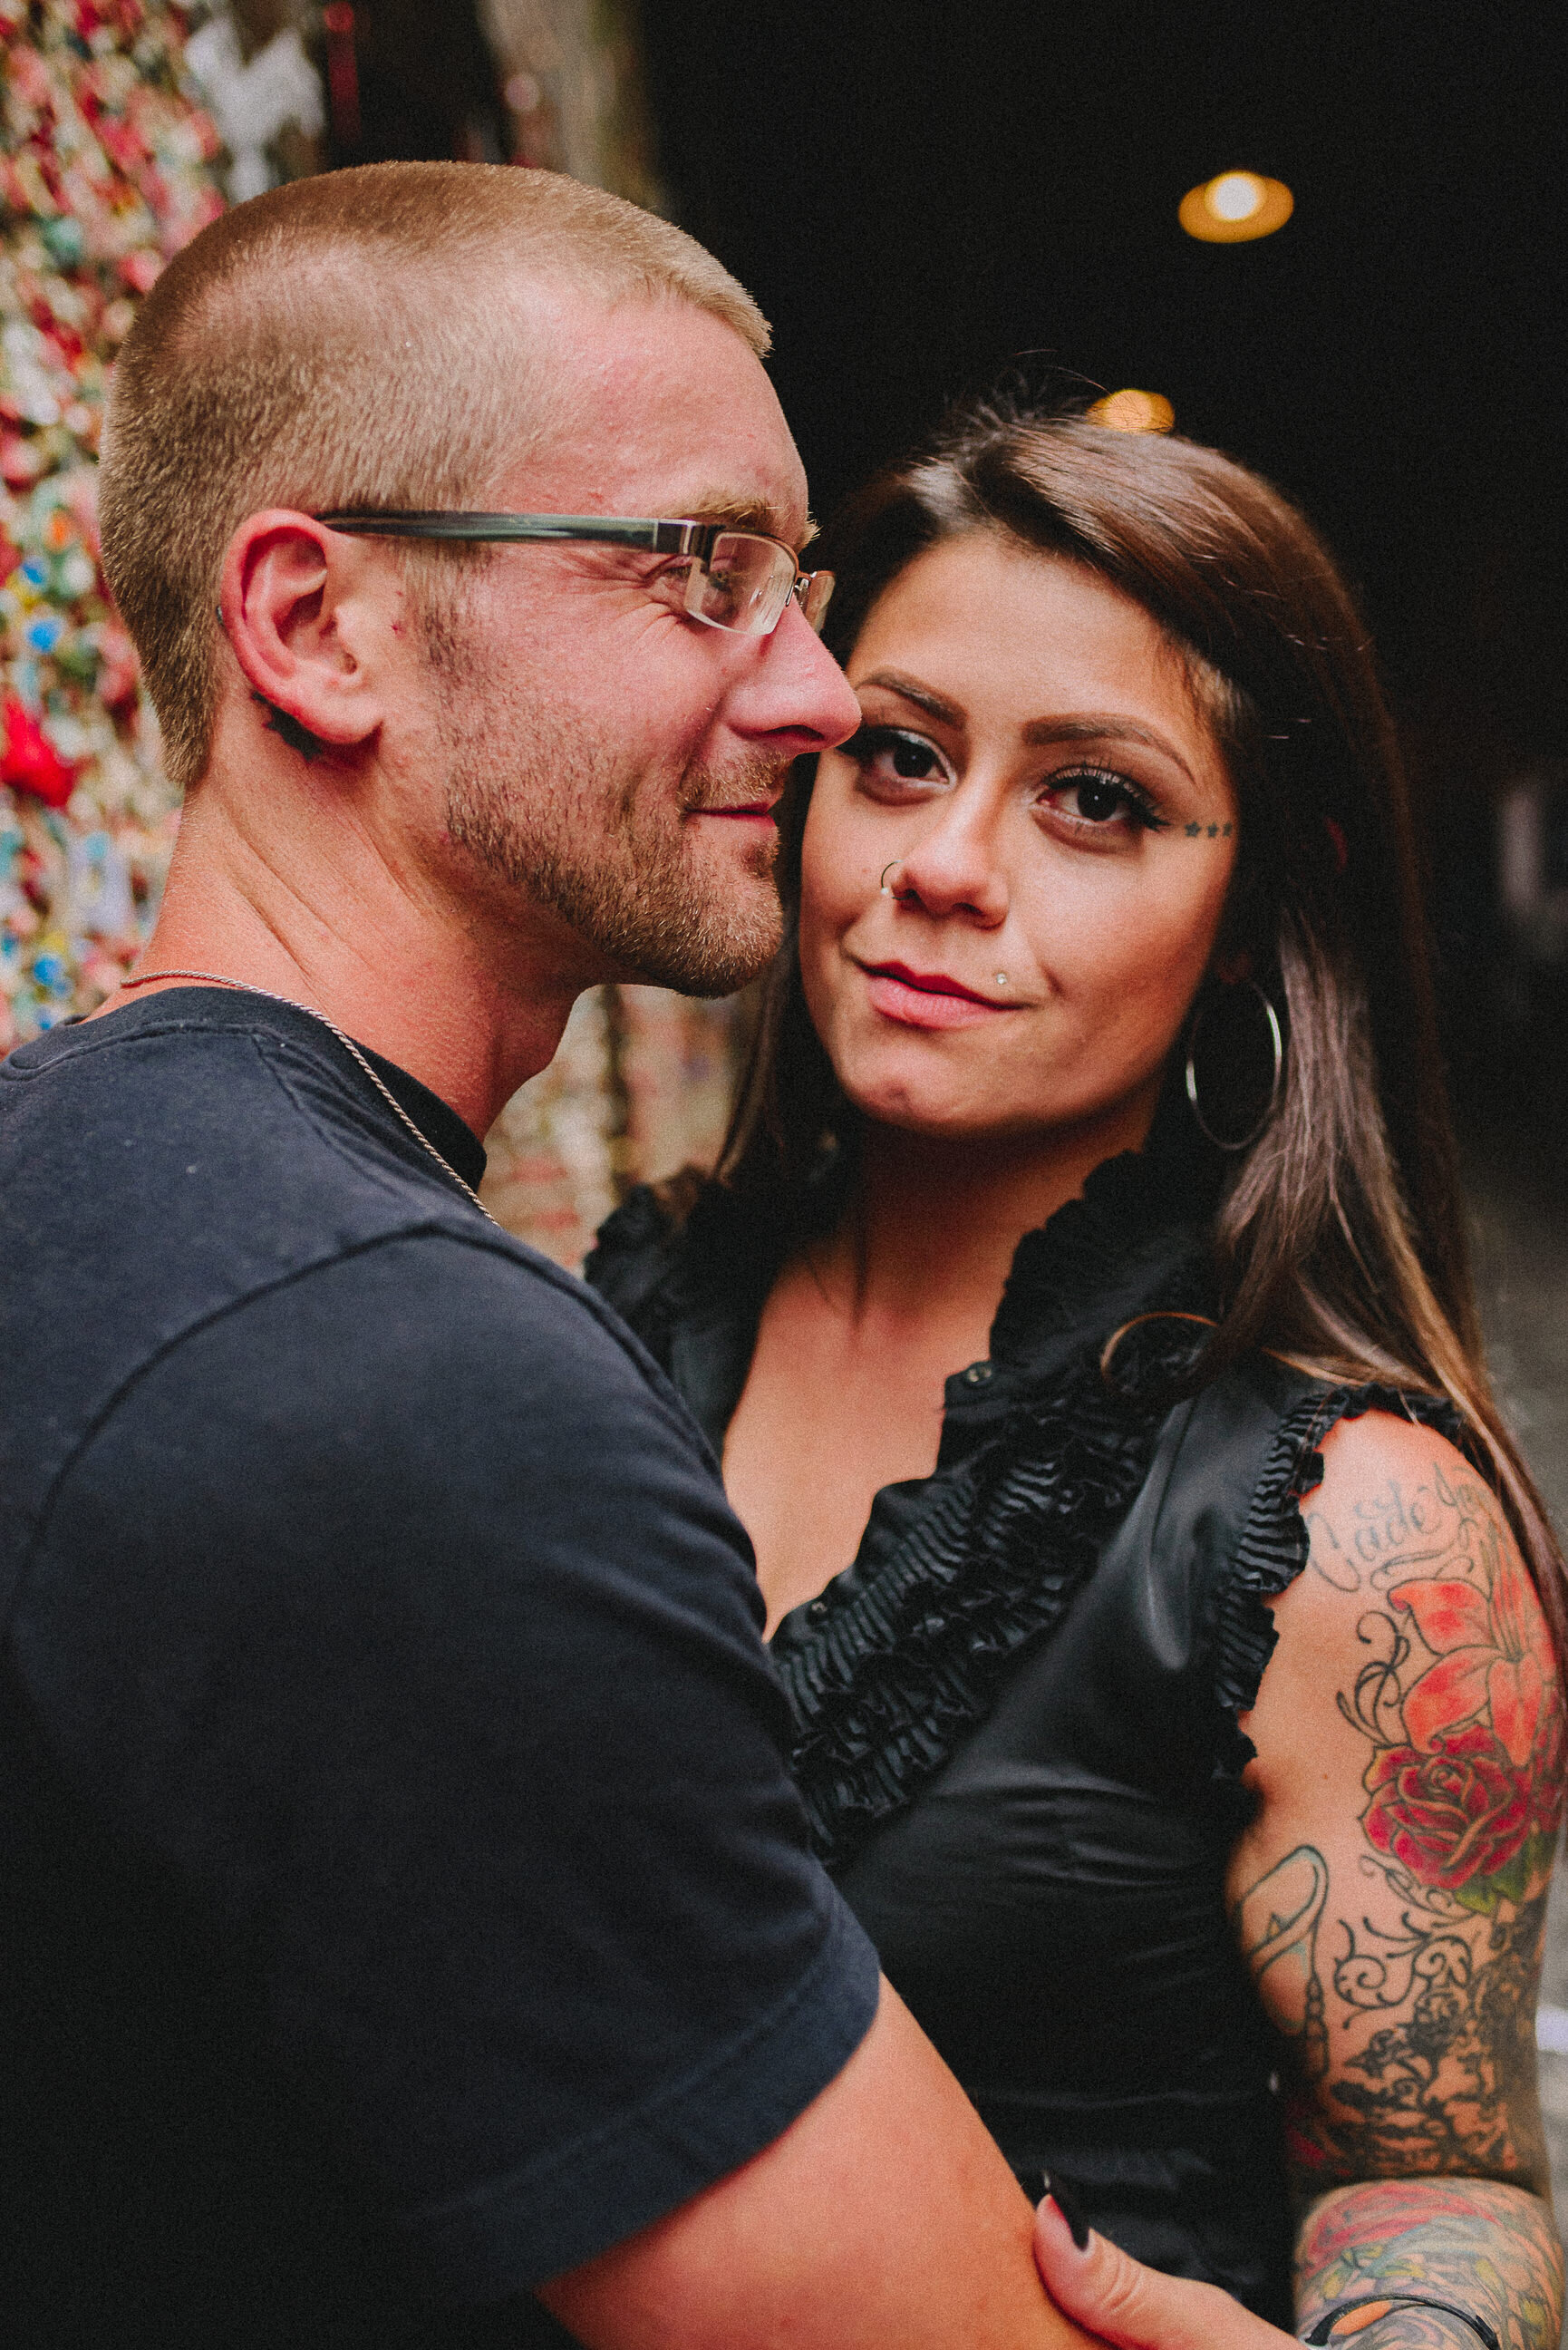 downtown-seattle-wa-engagement-session-way-up-north-photography (164).jpg